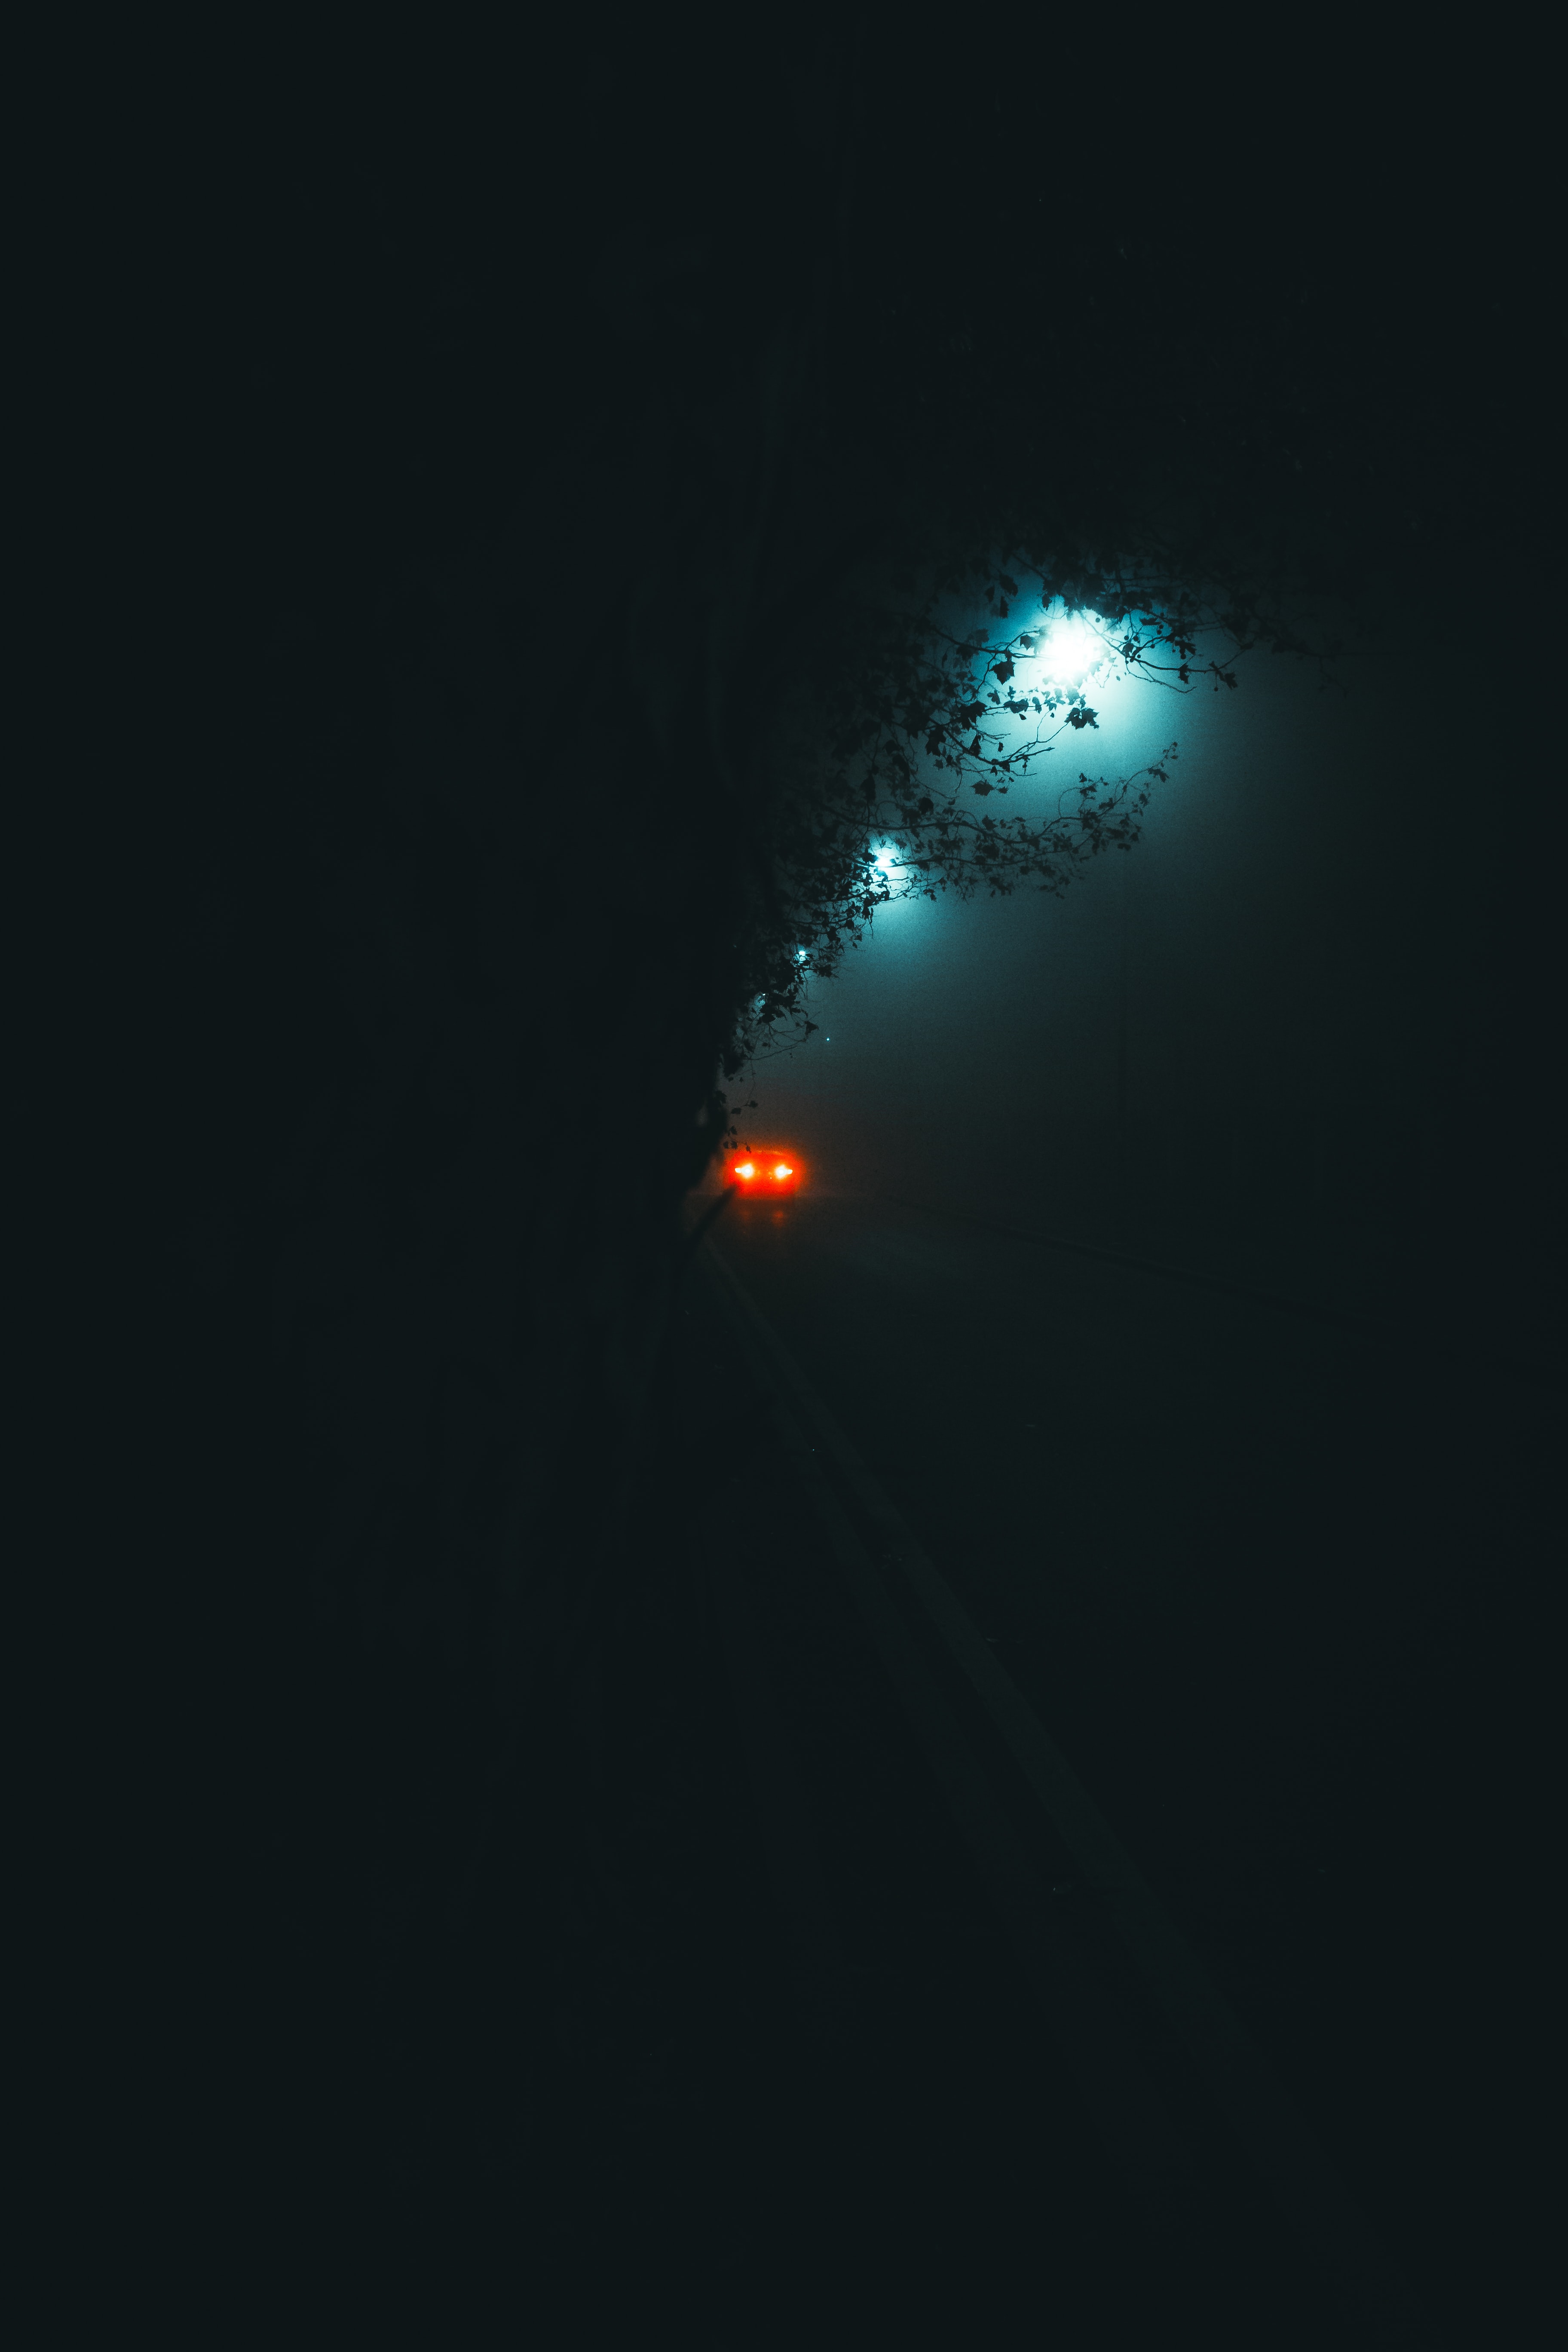 65907 download wallpaper headlights, night, lights, dark, road, car, machine, glow screensavers and pictures for free